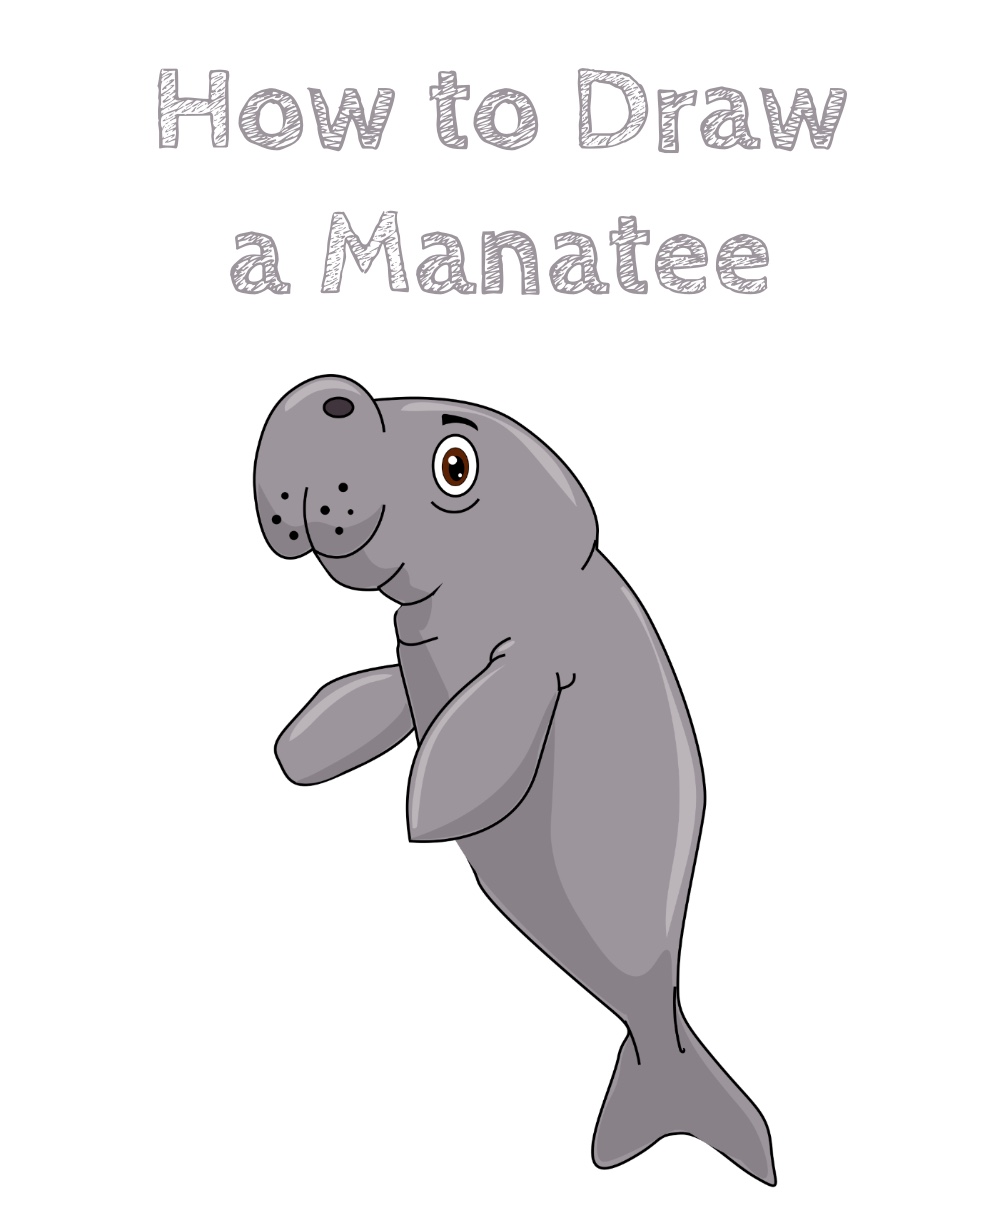 How to Draw a Manatee Easy